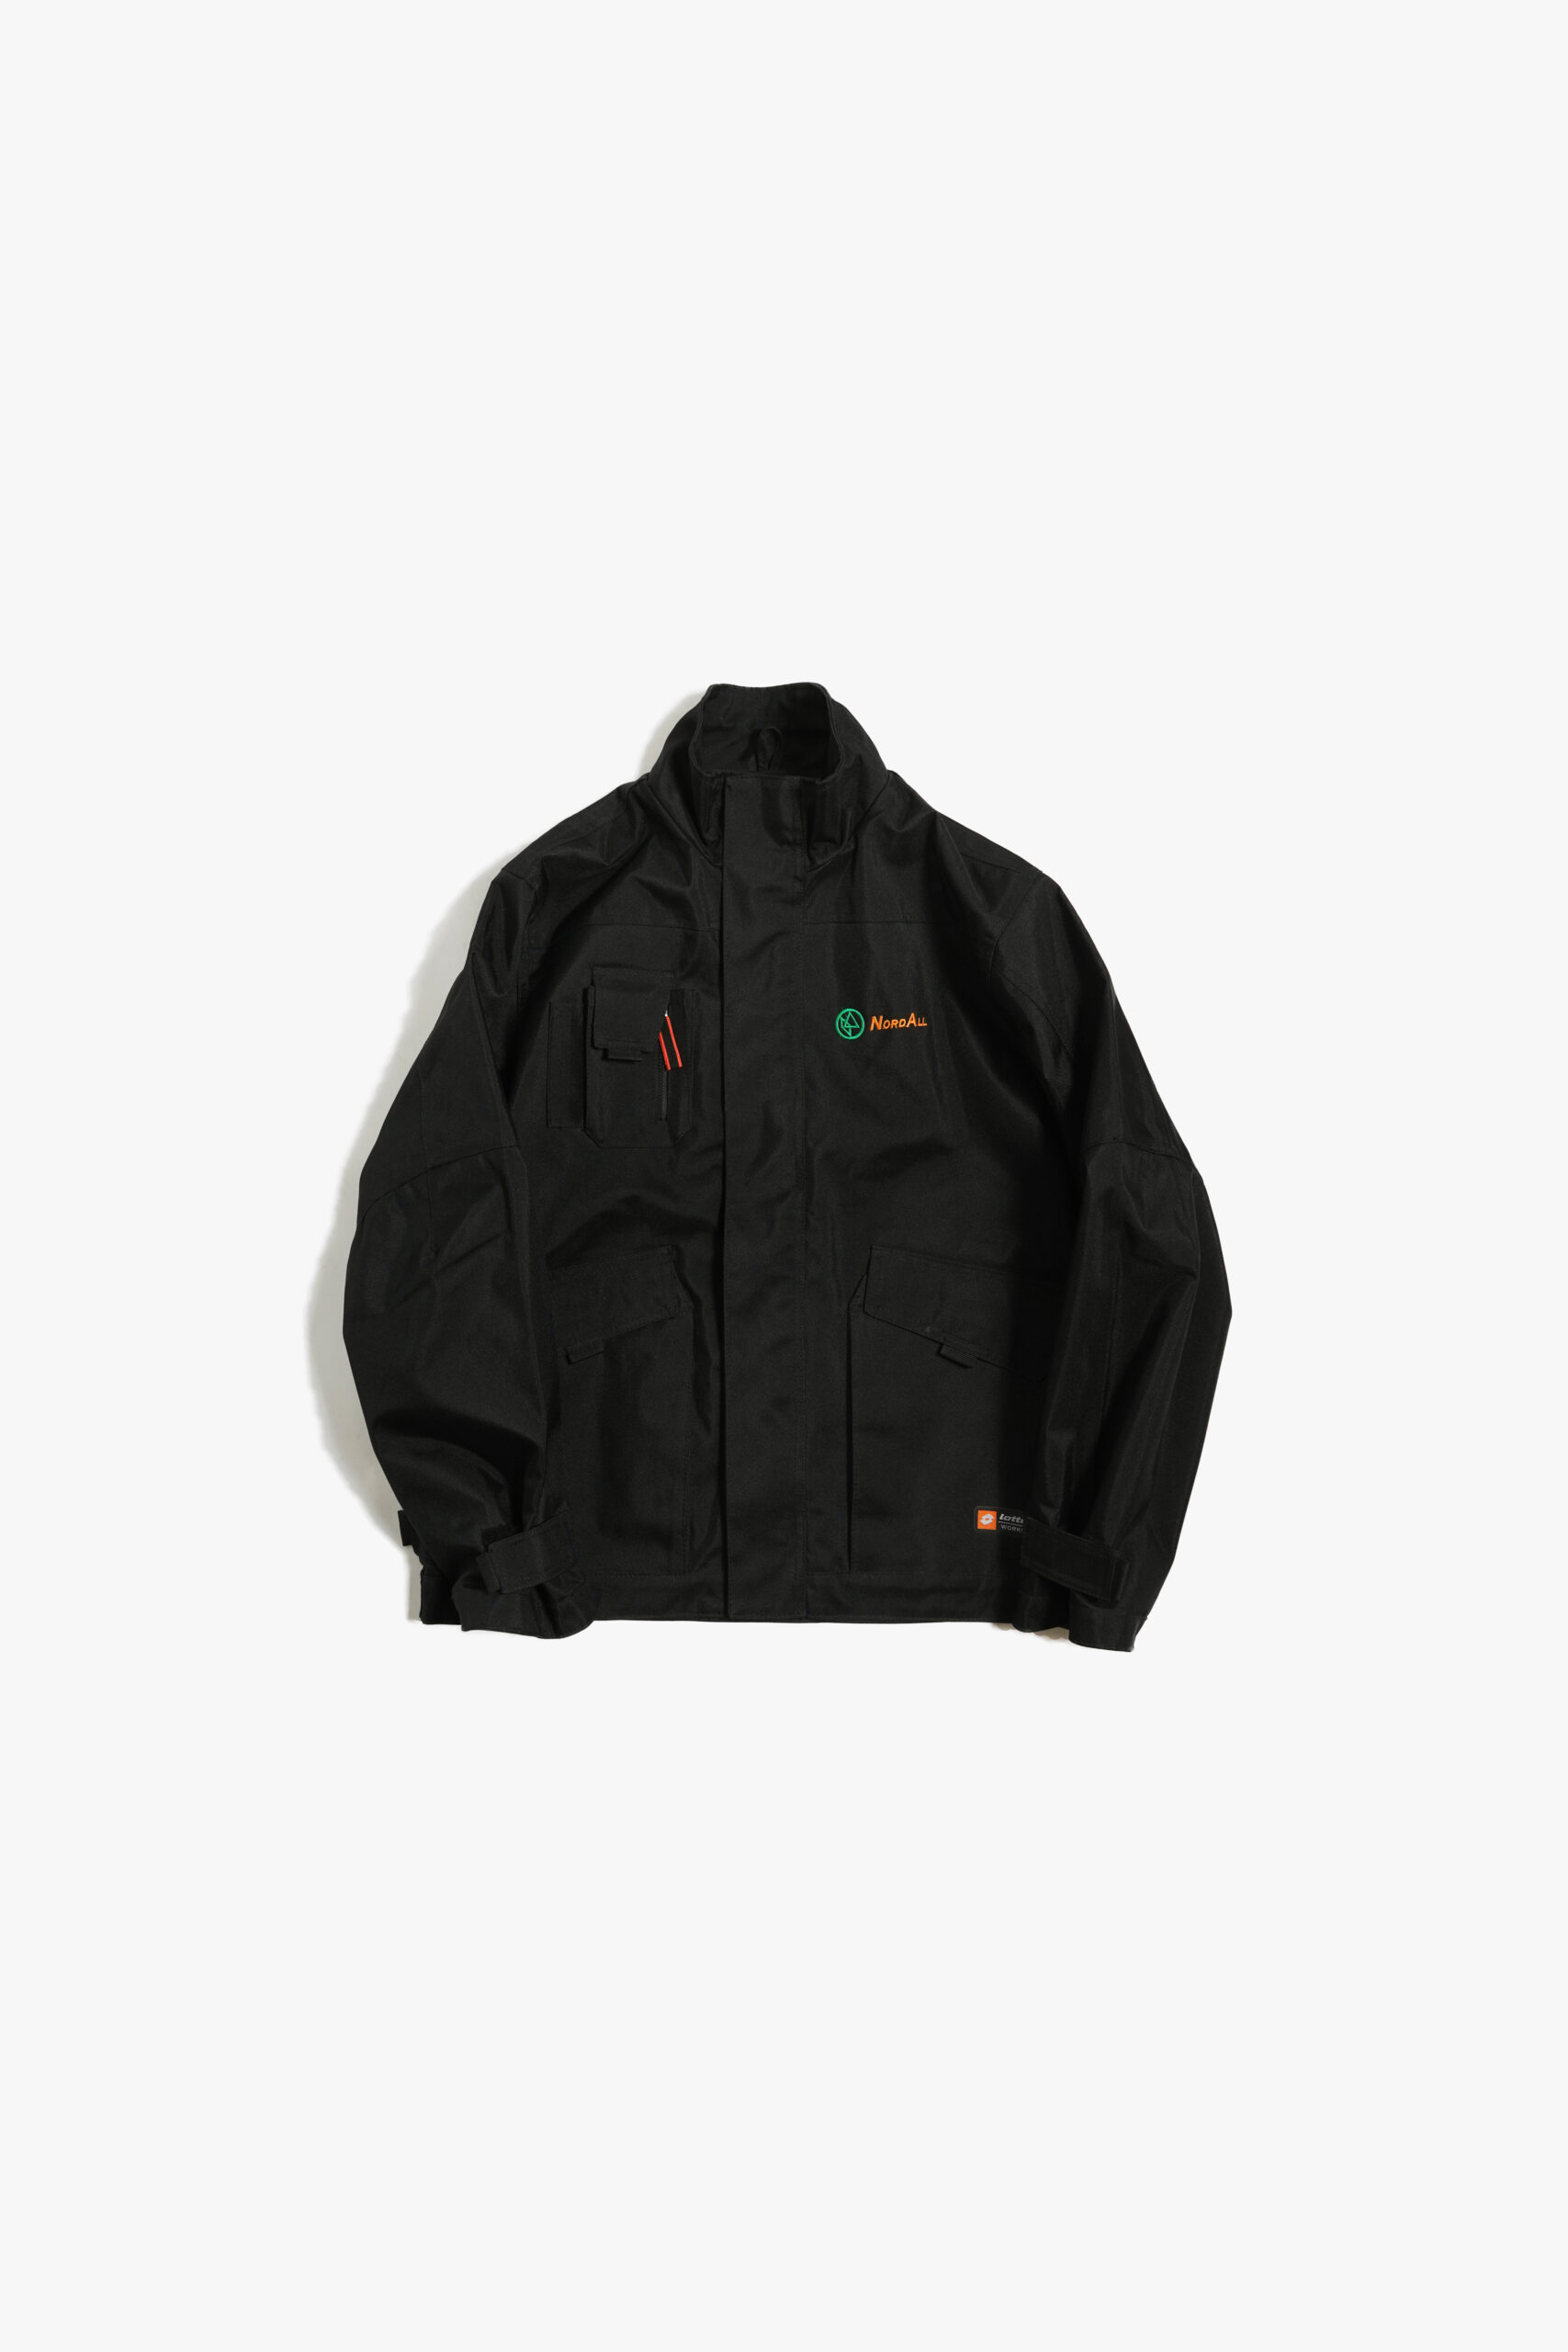 LOTTO WORKS UTILITY JACKET MADE IN ITALY